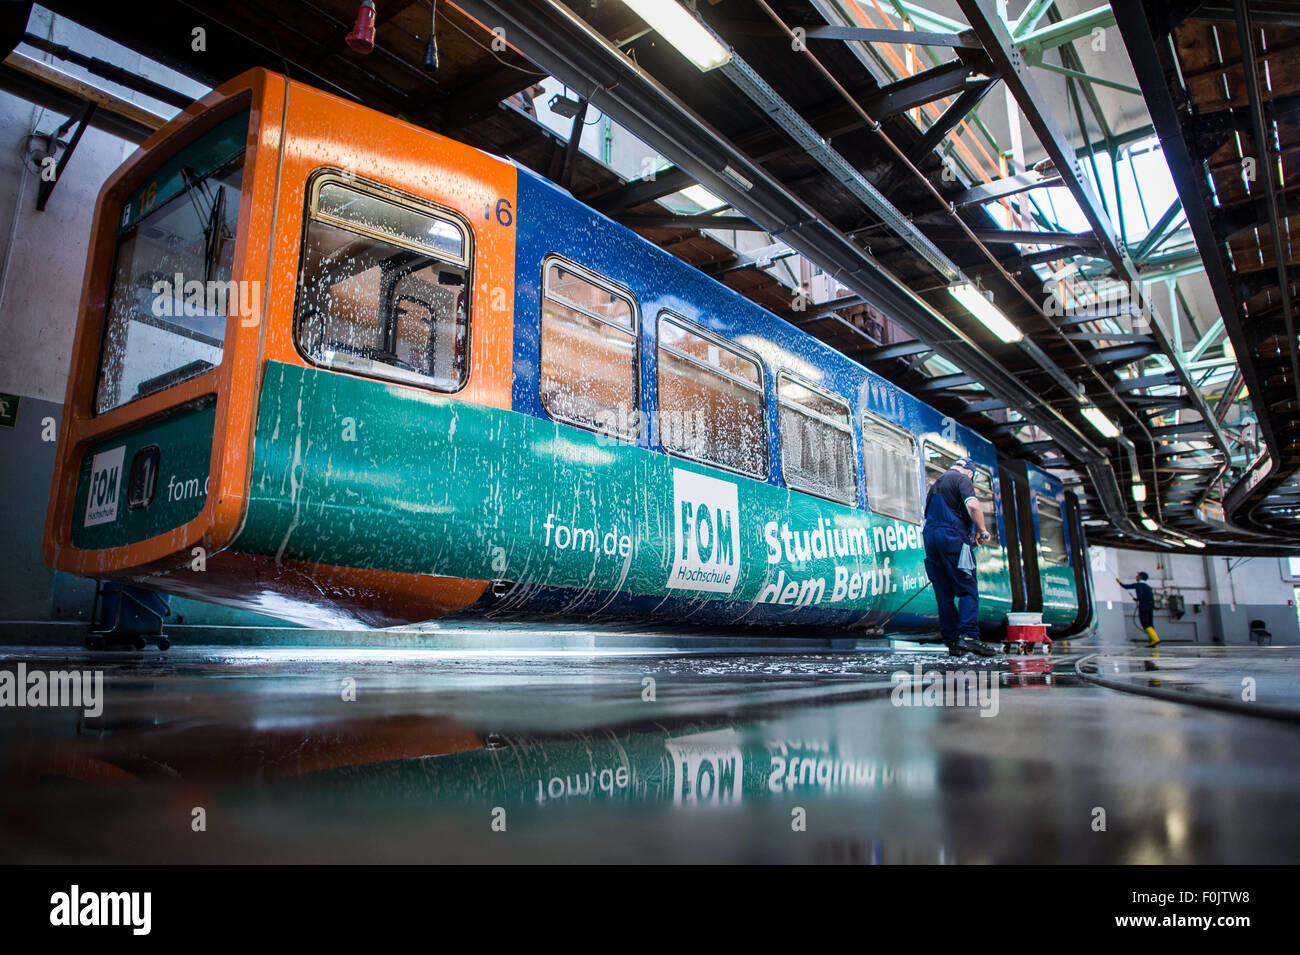 Wuppertal, Germany. 13th Aug, 2015. A man cleans a carriage in the workshop of the suspension railway located at its terminal station in Wuppertal, Germany, 13 August 2015. Wuppertal's public utility company WSW will give away three carriages of its well-known railway for free, with an additional 21 from the 1970s to be sold for 5,000 euros next year when the fourth generation of the railway is scheduled to commence operations. Photo: Maja Hitij/dpa/Alamy Live News Stock Photo